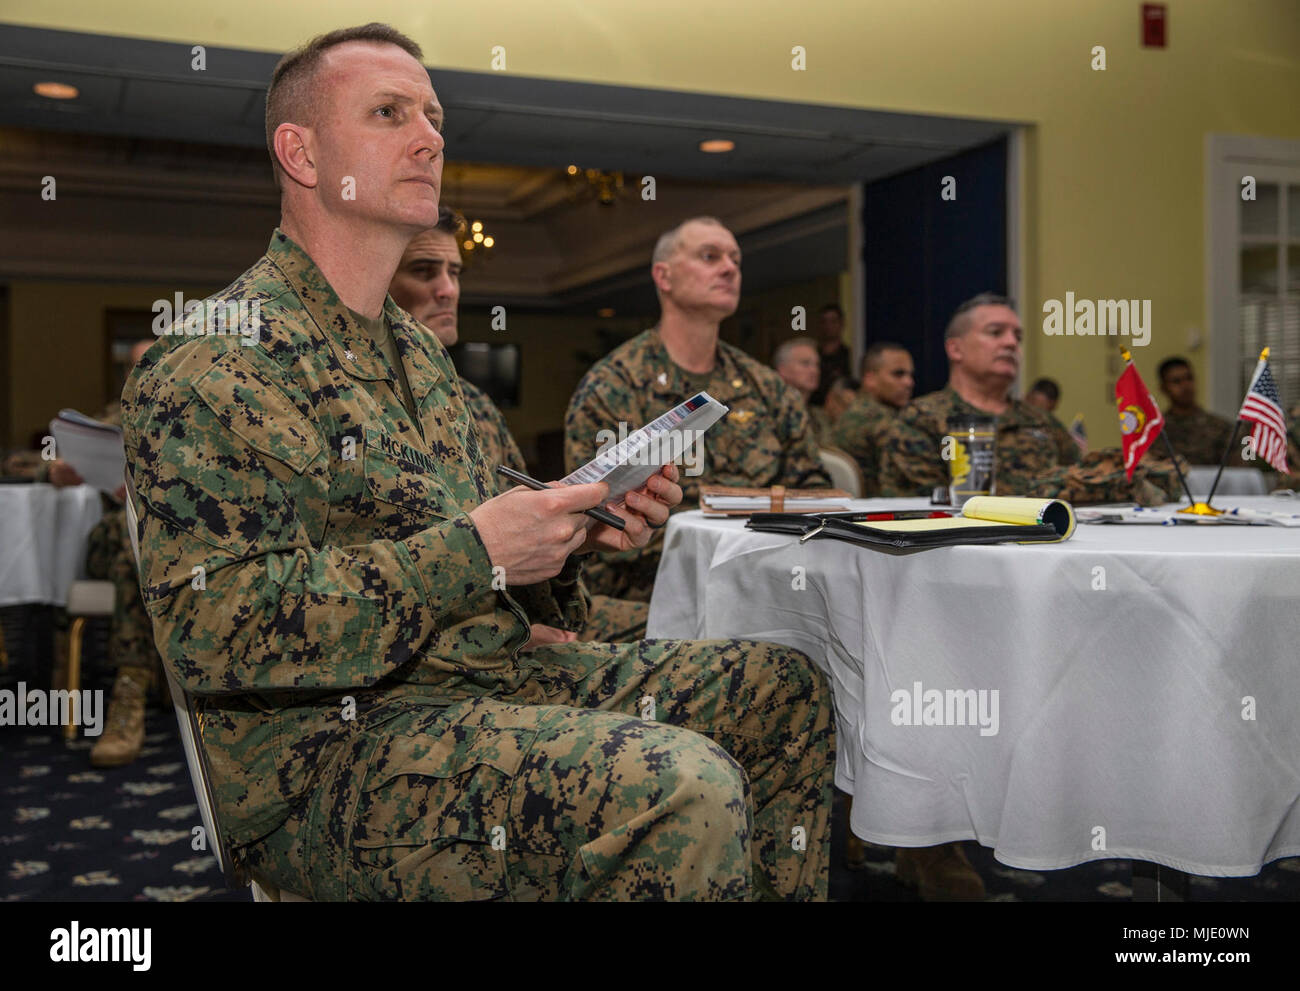 Lt. Col. Matthew McKinney, logistics officer, Combat Logistics Regiment 2, 2nd Marine Logistics Group, attends the Navy-Marine Corps Relief Society kick off at the Officer's Club on Marine Corps Base Camp Lejeune, N.C., Feb. 20, 2018. The NMCRS is a program that provides financial, educational, and other assistance to members of the Naval Service of the United States. (U.S. Marine Corps Stock Photo